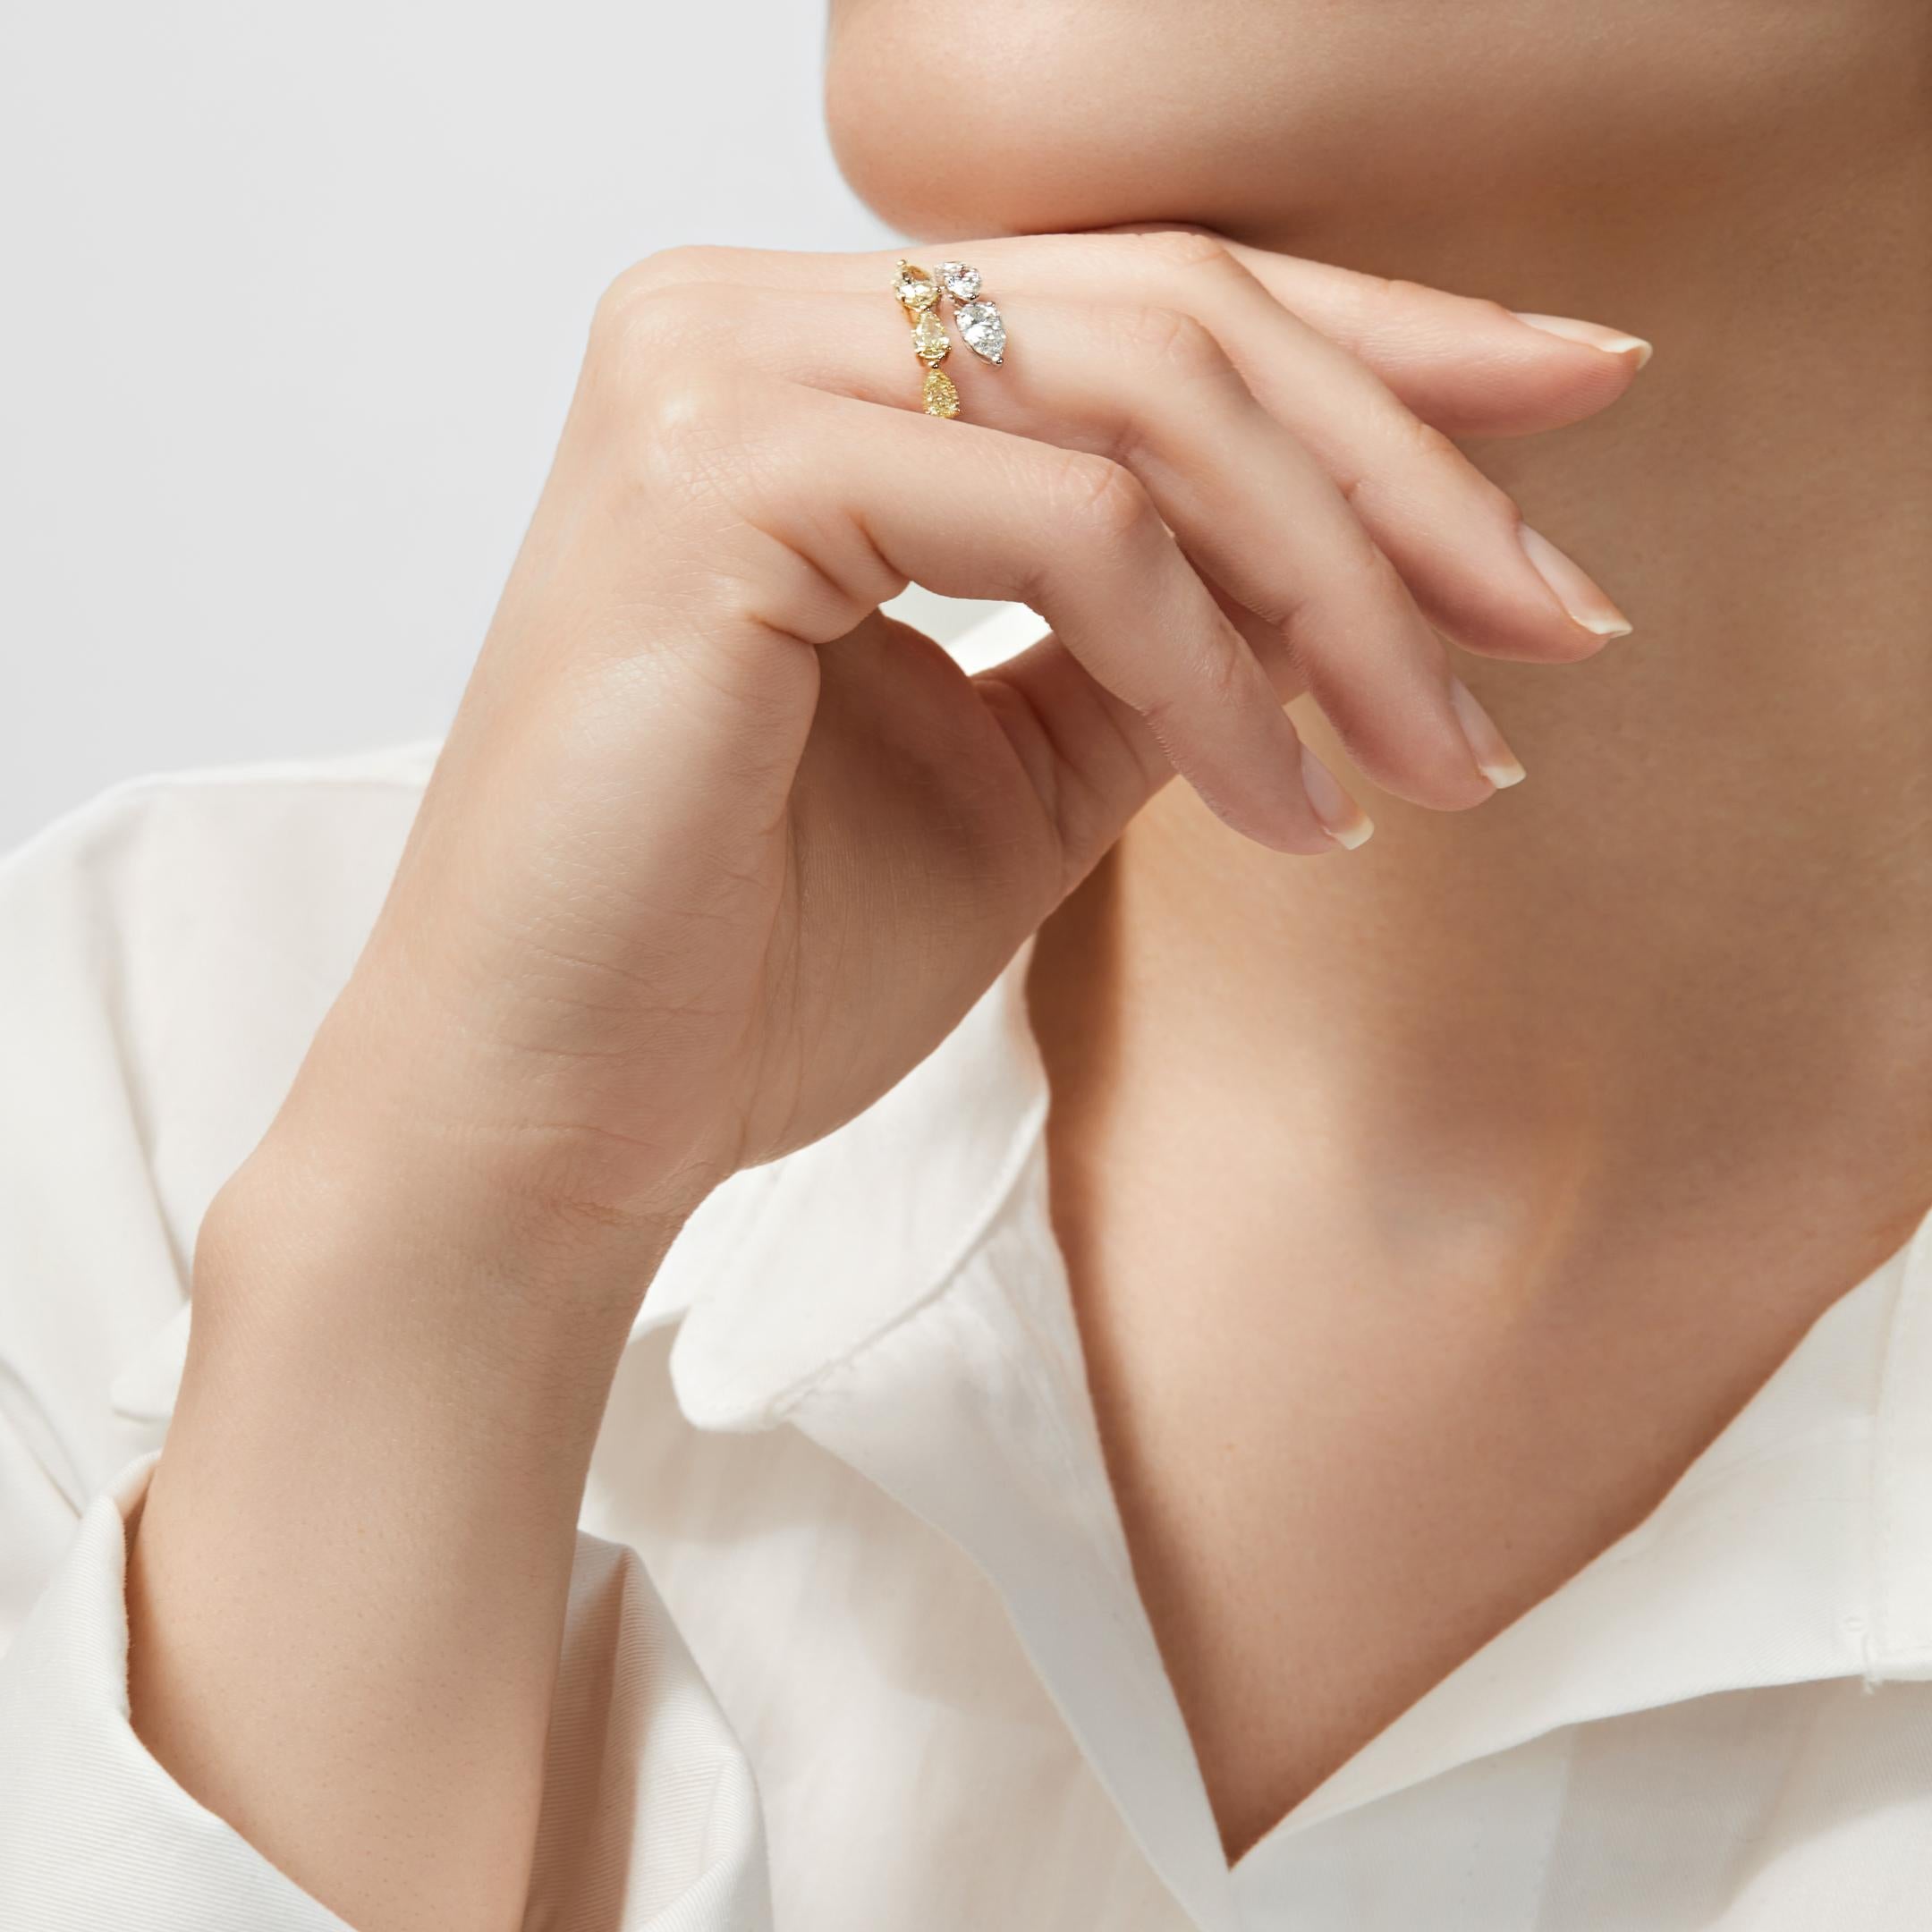 Your perfect accessory awaits in the Yellow and White Diamond Bypass Ring. This chic statement piece embraces the finger with a line of pear-shaped white diamonds that faces a row of pear-shaped yellow diamonds. The ring’s open design is